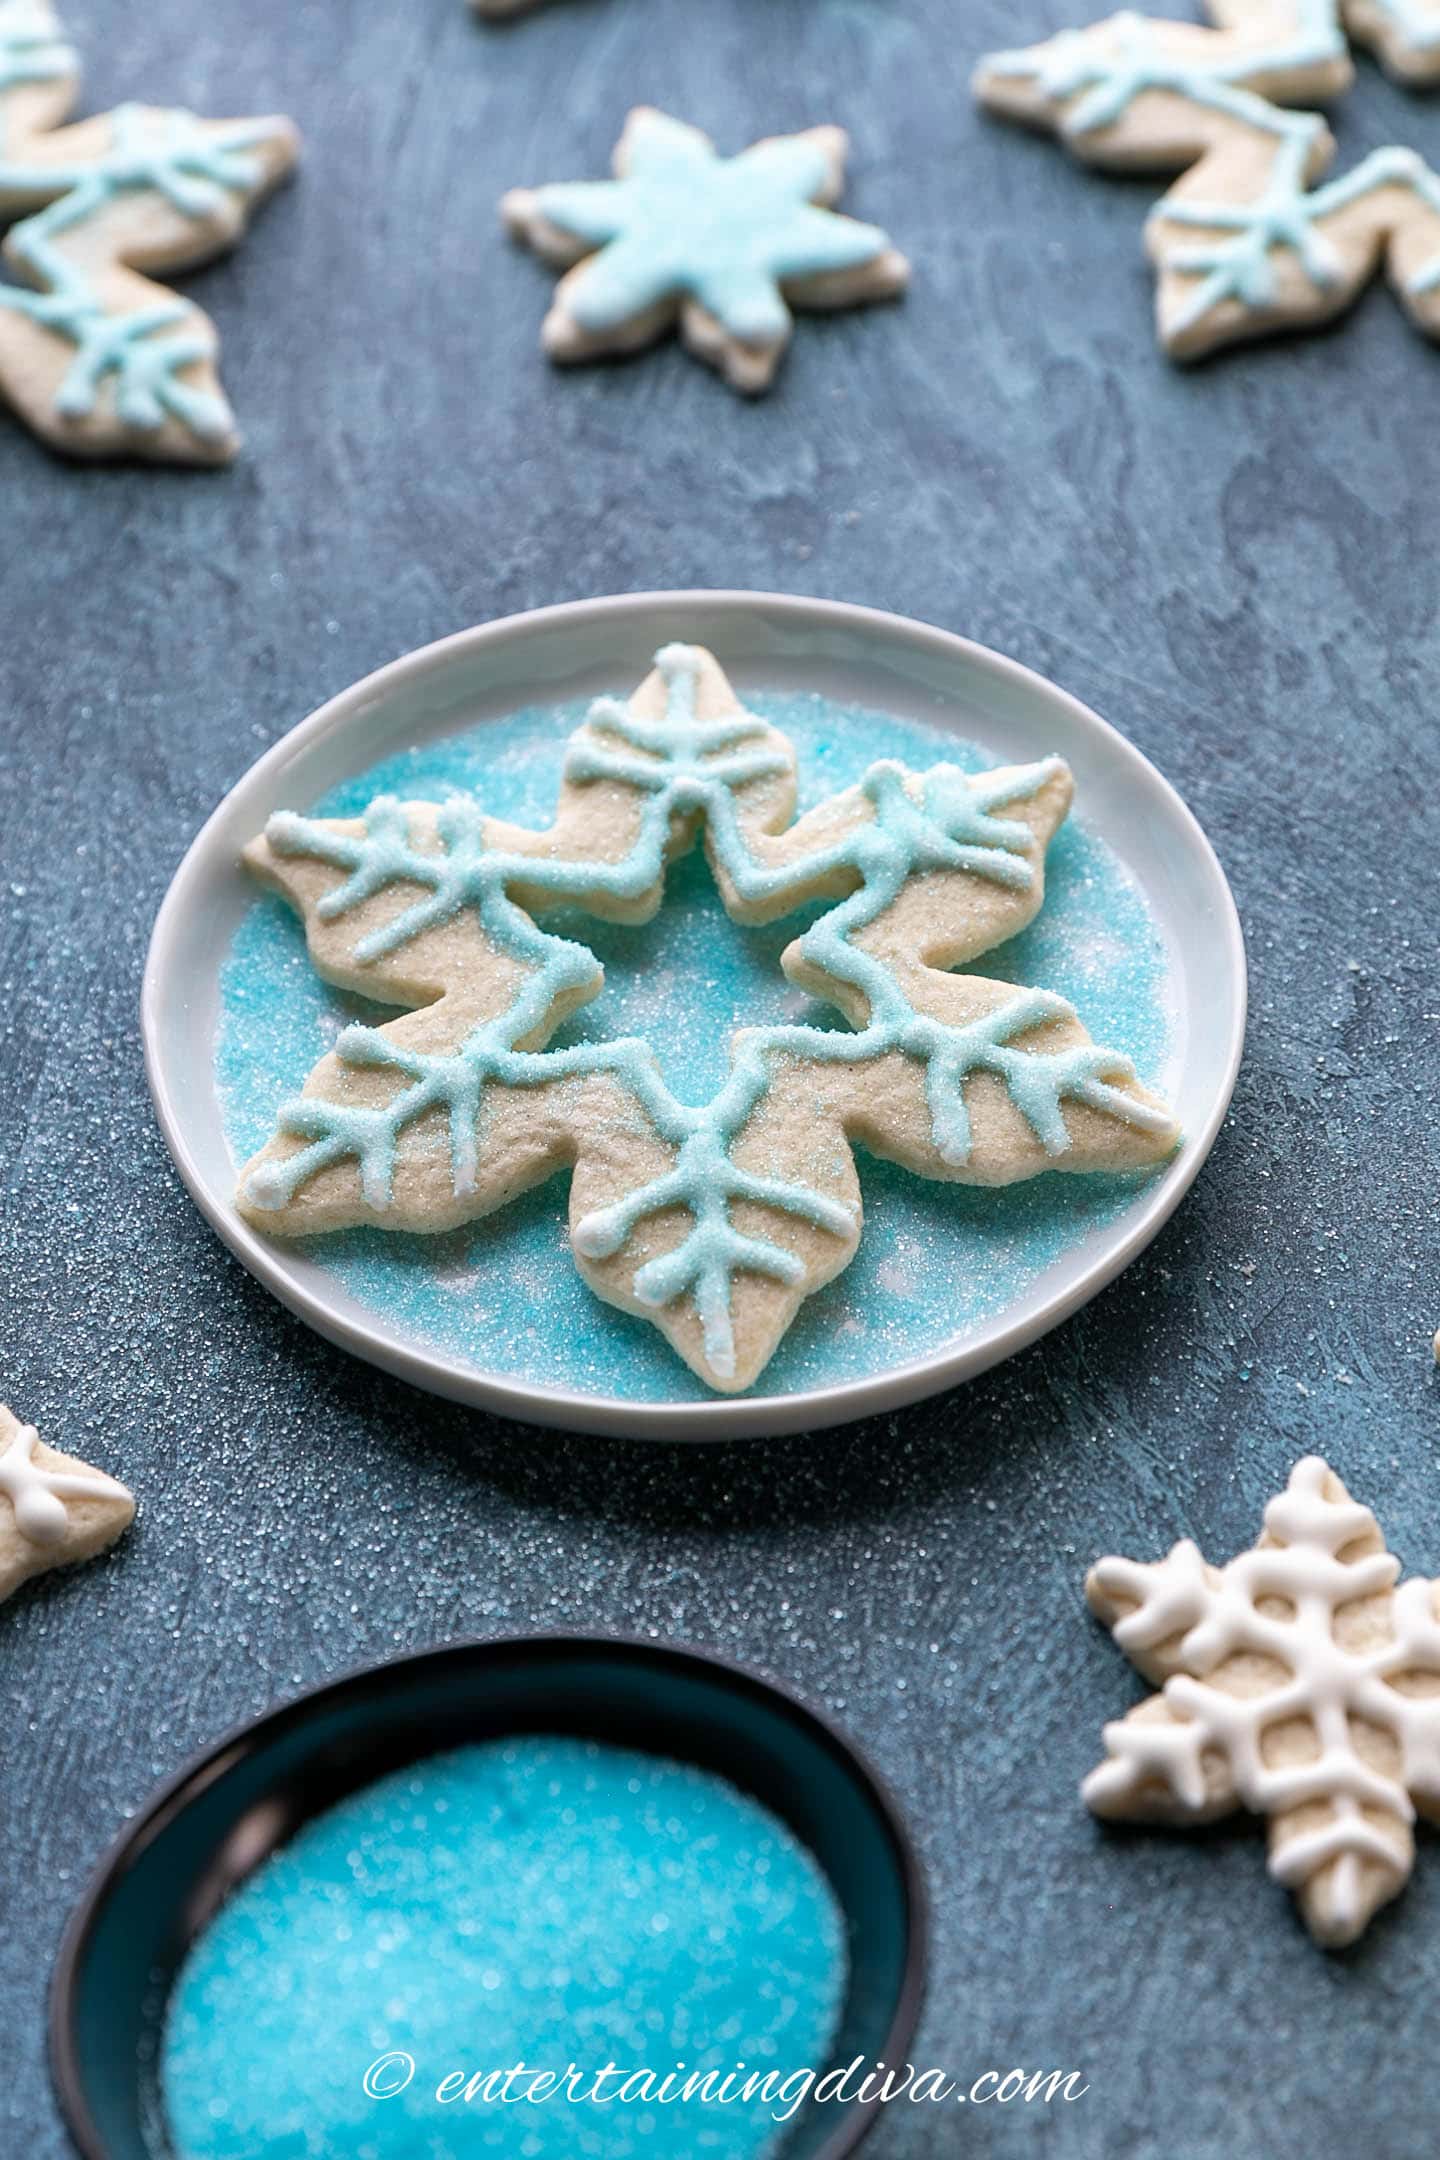 snowflake sugar cookie decorated with lacy white icing design and blue sugar